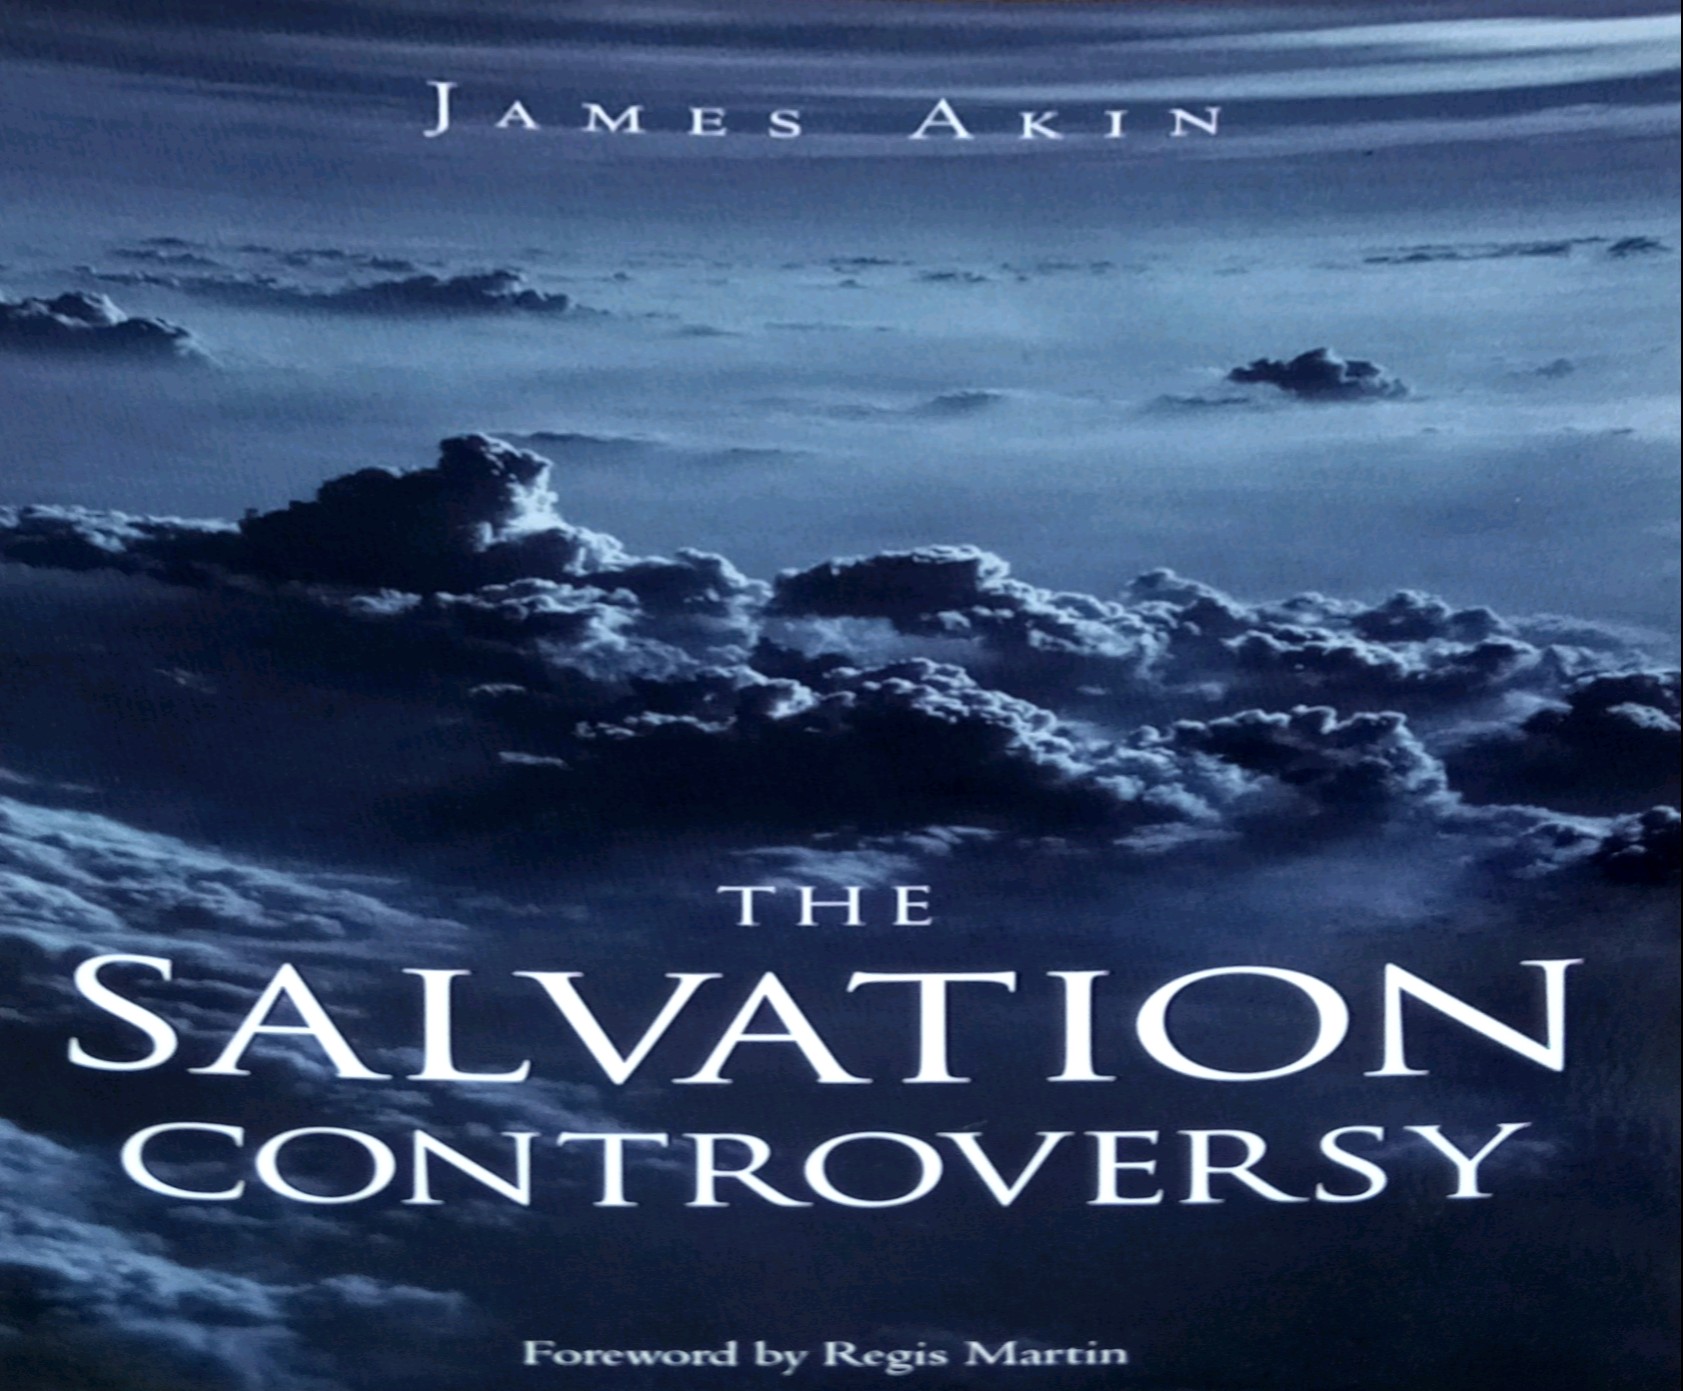 THE SALVATION CONTROVERSY